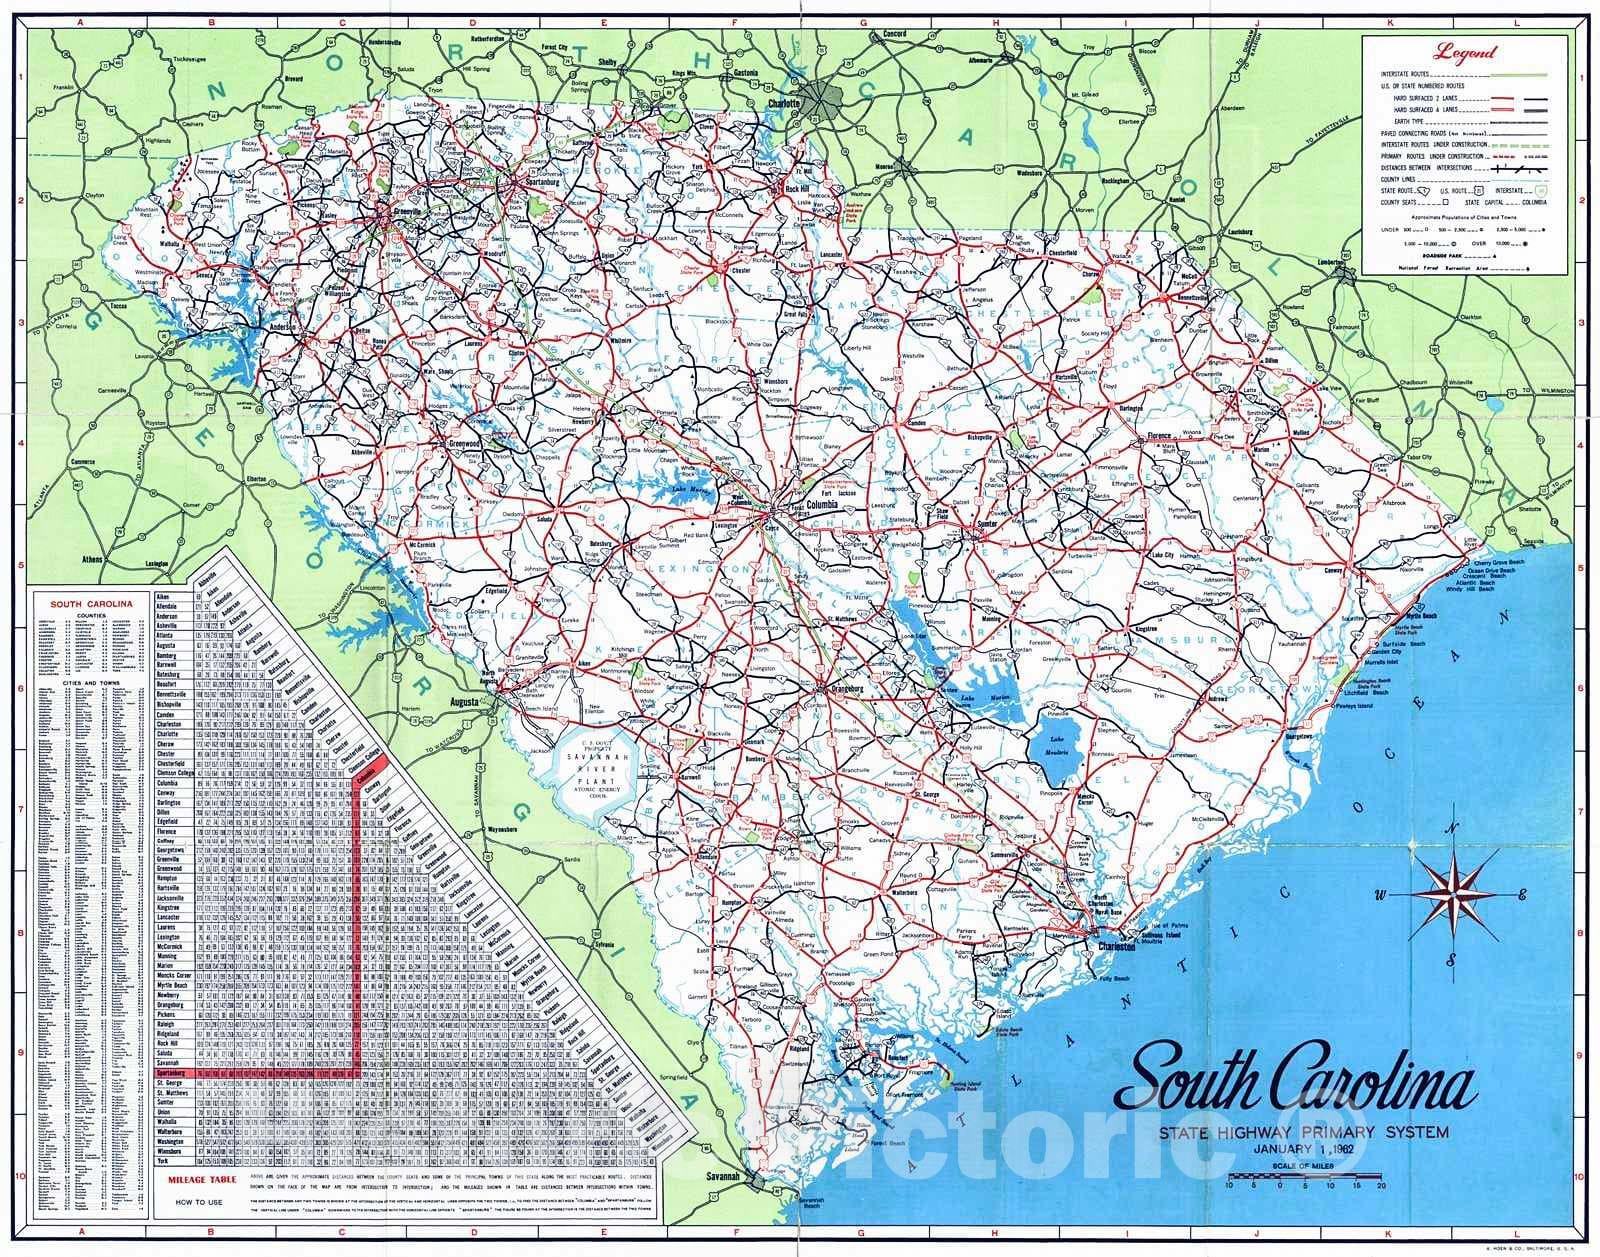 Historic Map : 1962 South Carolina State Highway Primary System  : Vintage Wall Art